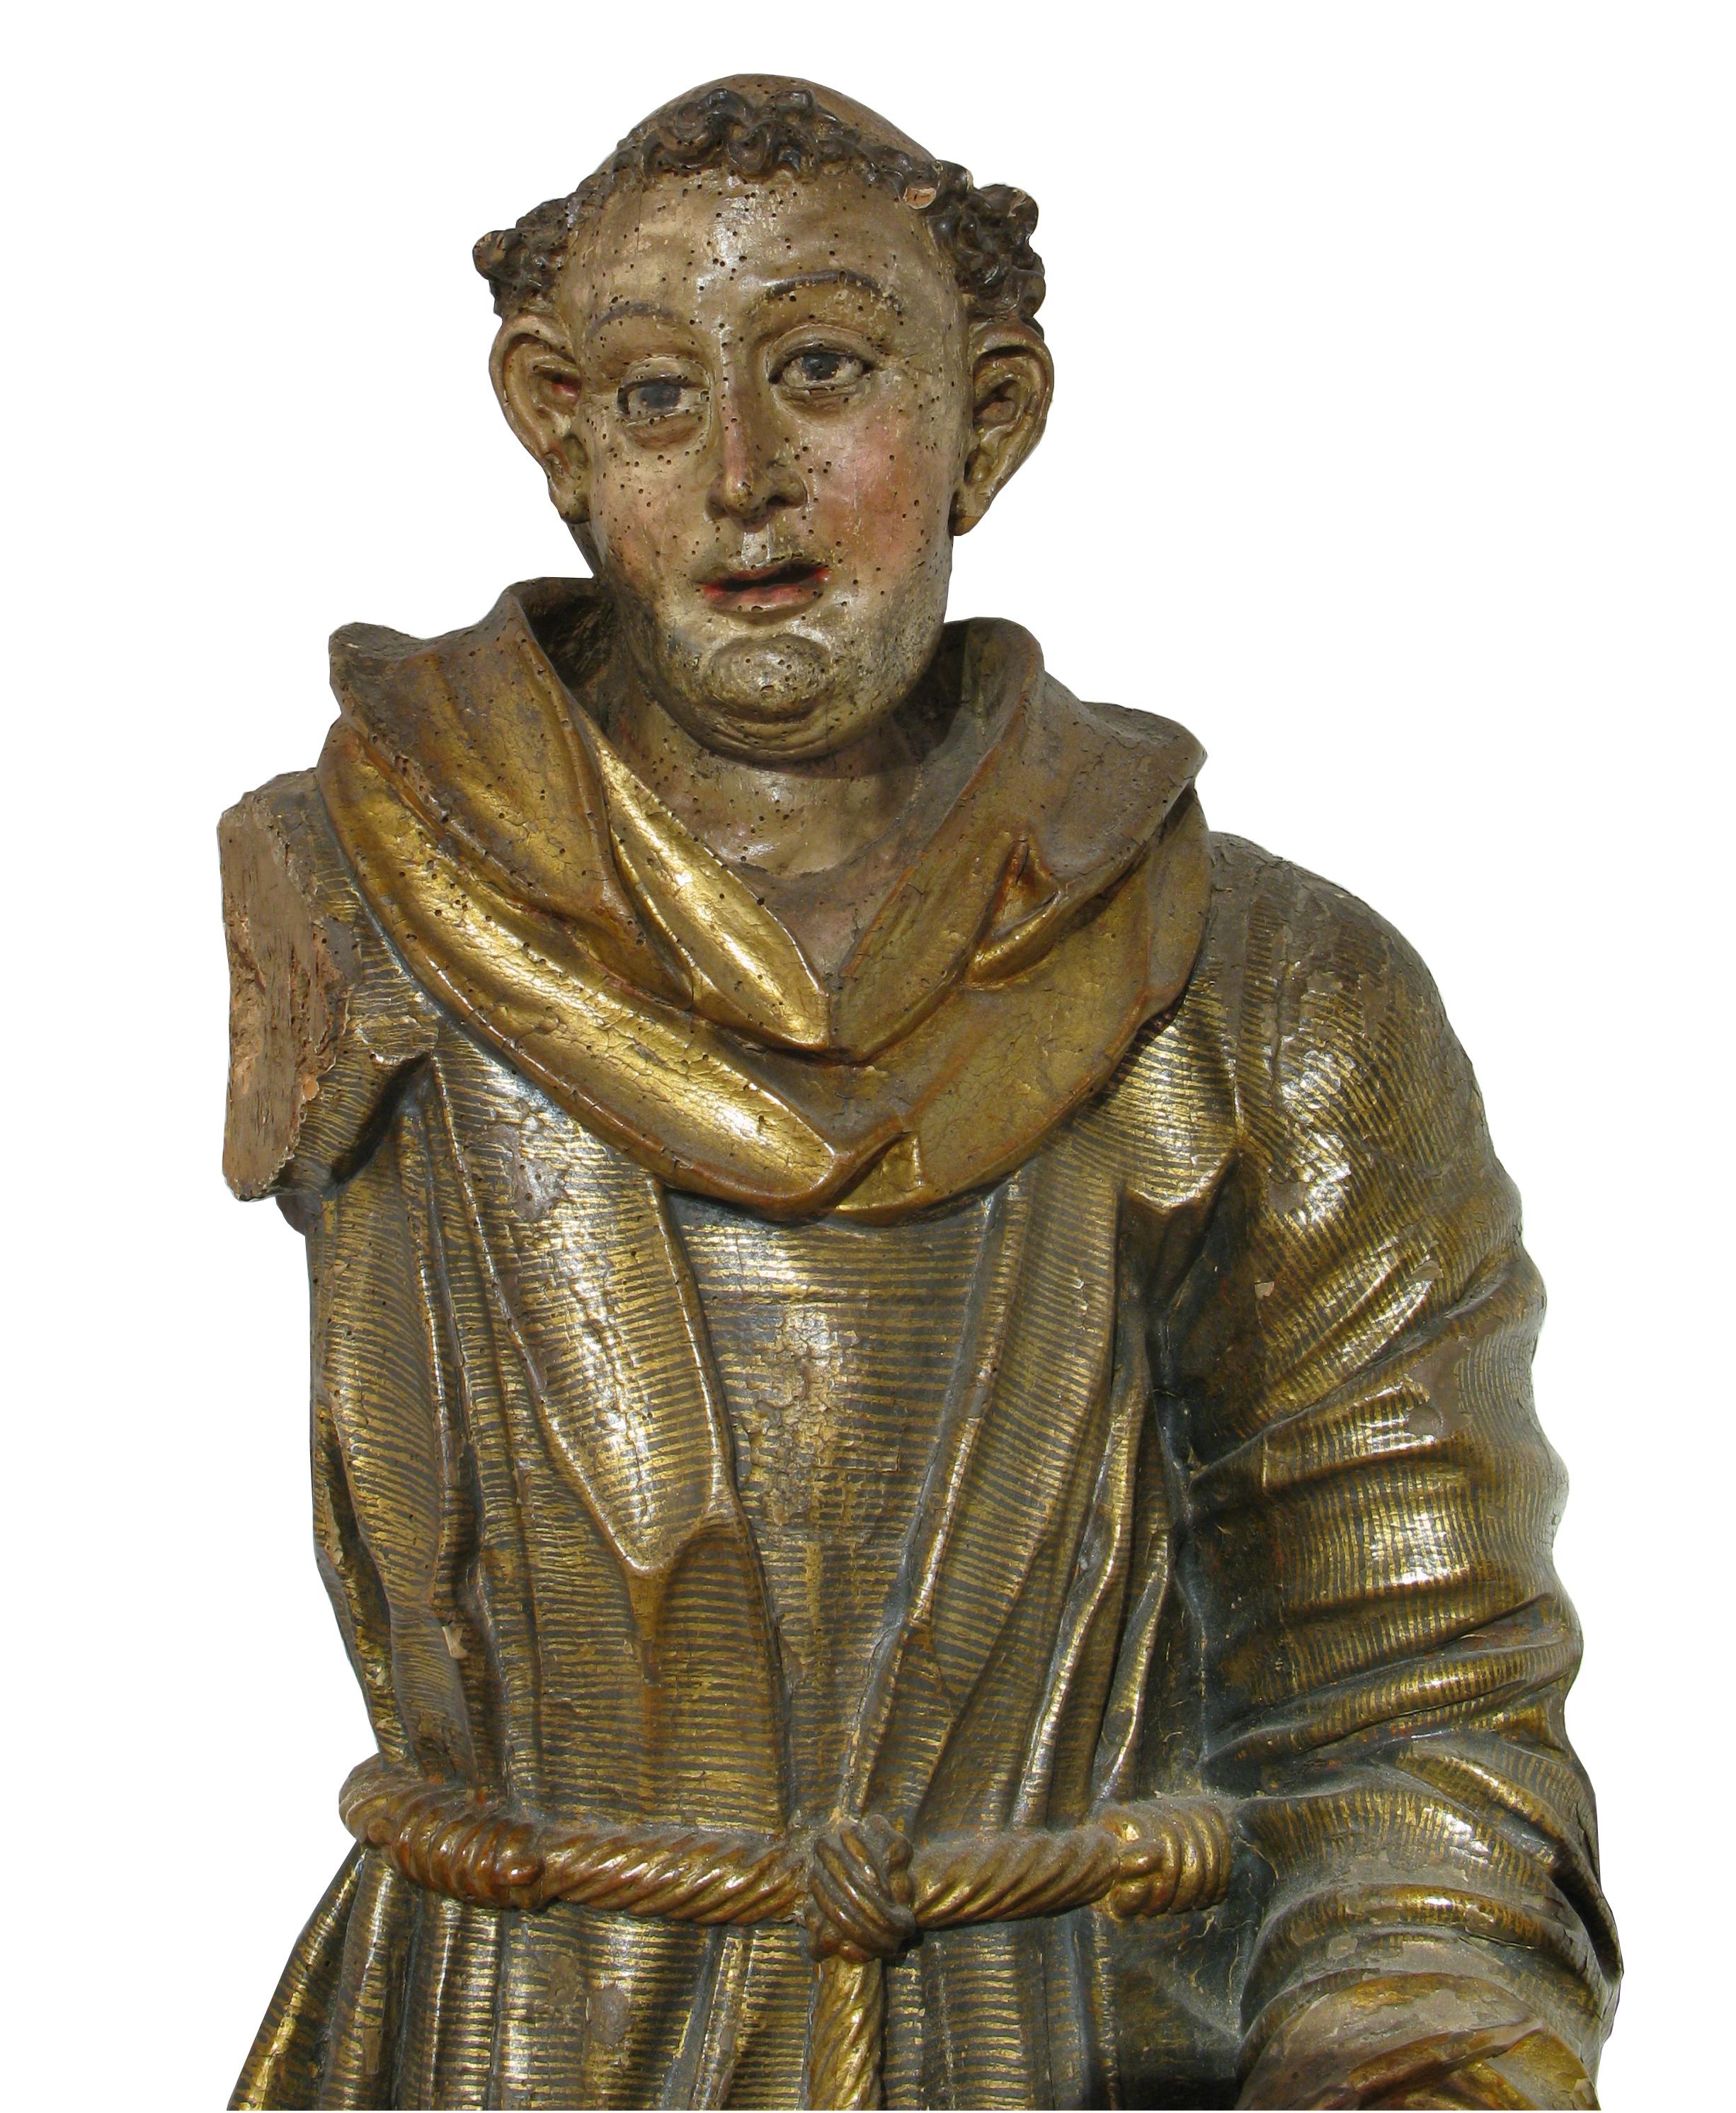 Friar (St. Anthony), polychrome and gilded wood sculpture, 16th century


St. Anthony standing, caught  in the act of preaching.

Talar dress consisting of a tunic decorated in gold, striped with a thick hatching of parallel black lines, and cinched